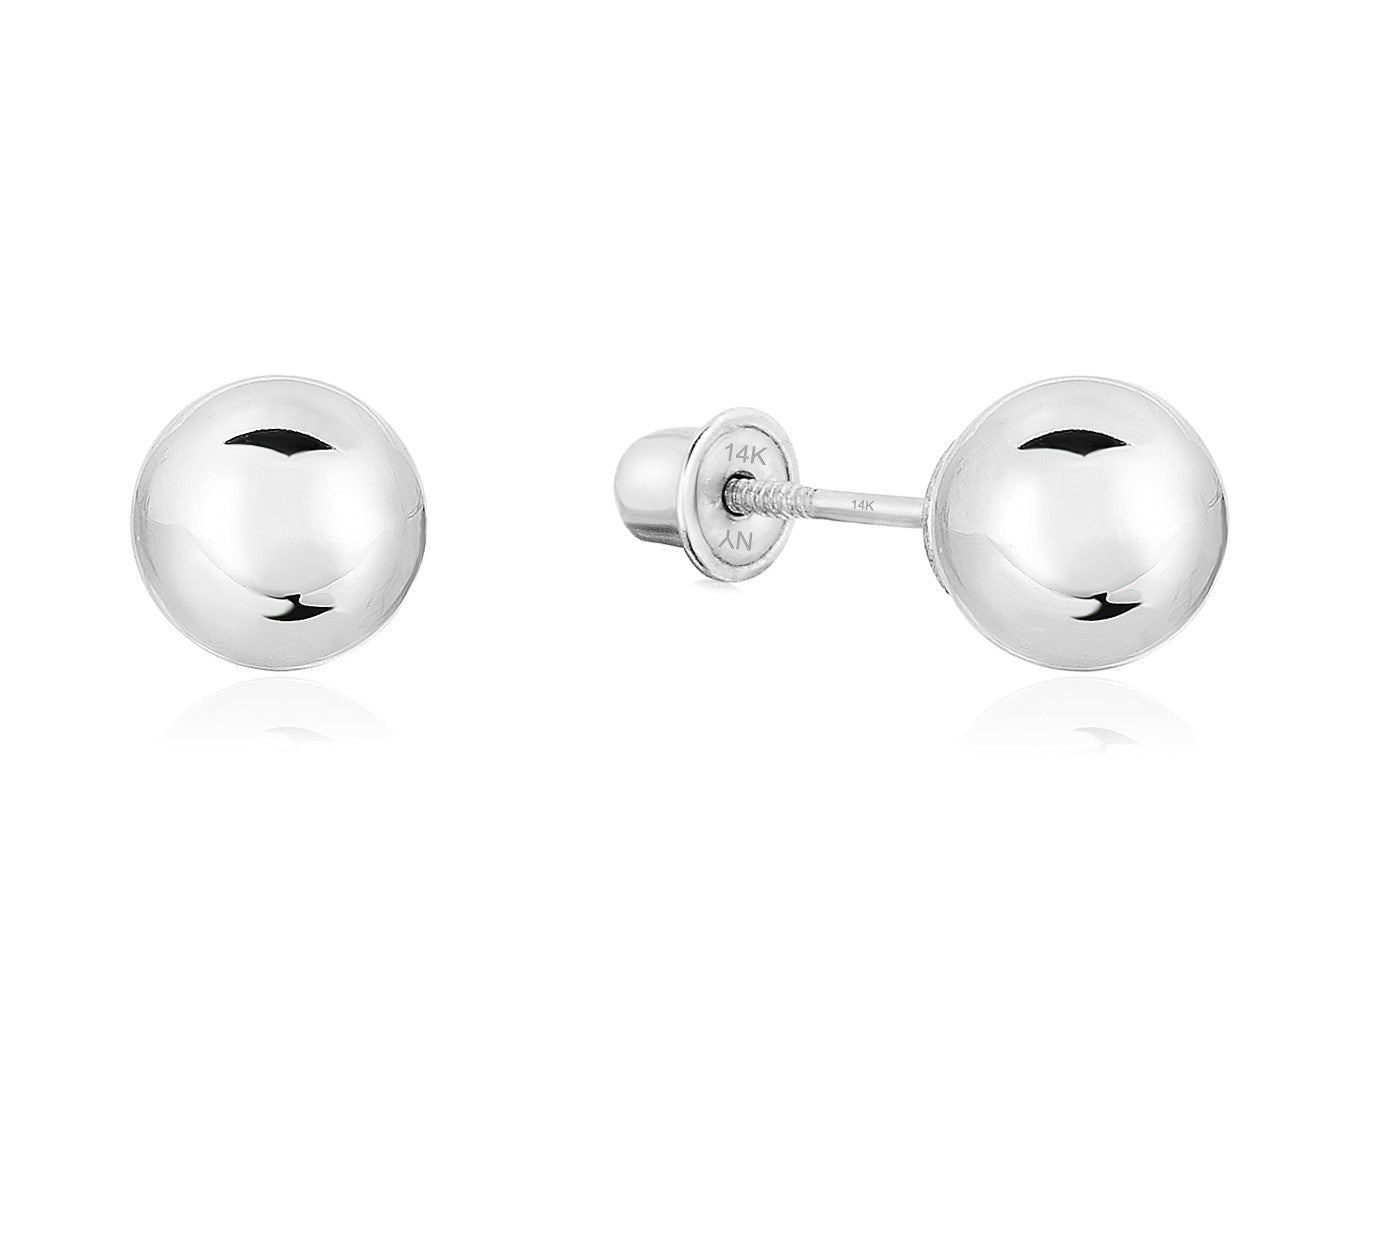 Surgical Steel Earring Stud Screwback Round Baby Mens Double Ball Earrings  Studs